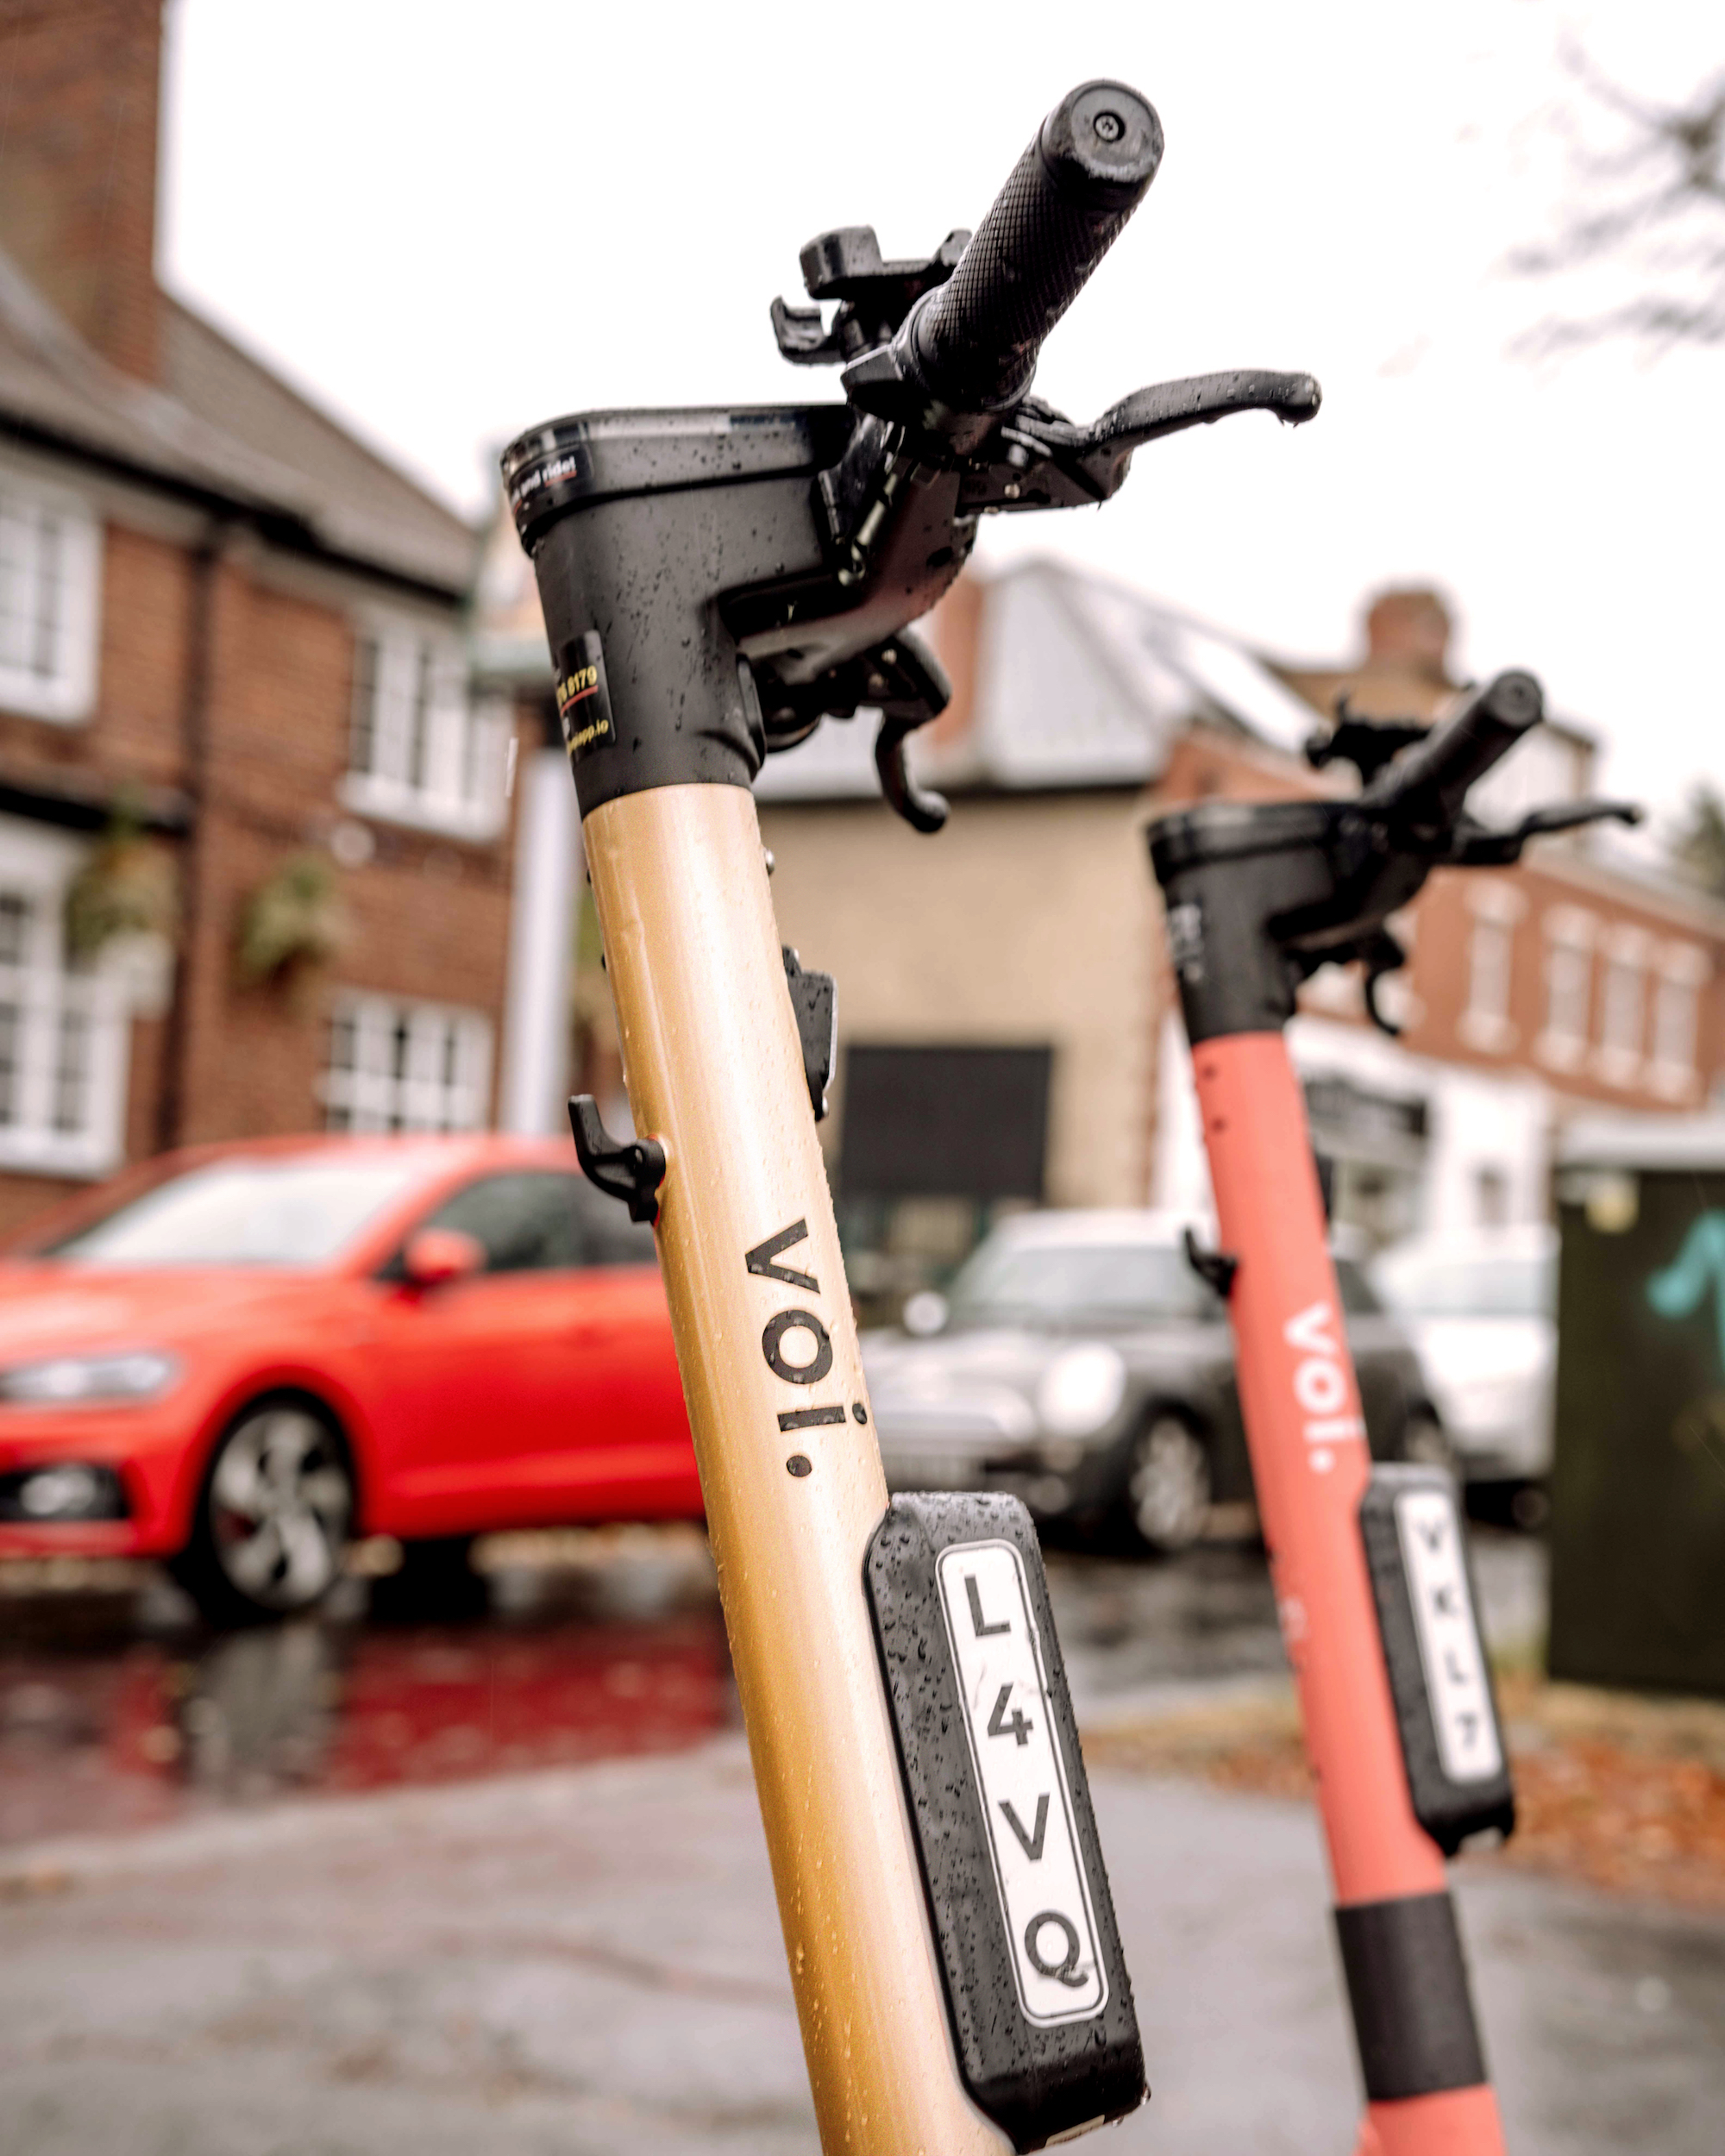 Voi Golden ticket electric scooters UK Christmas charity organisation Cycling Projects